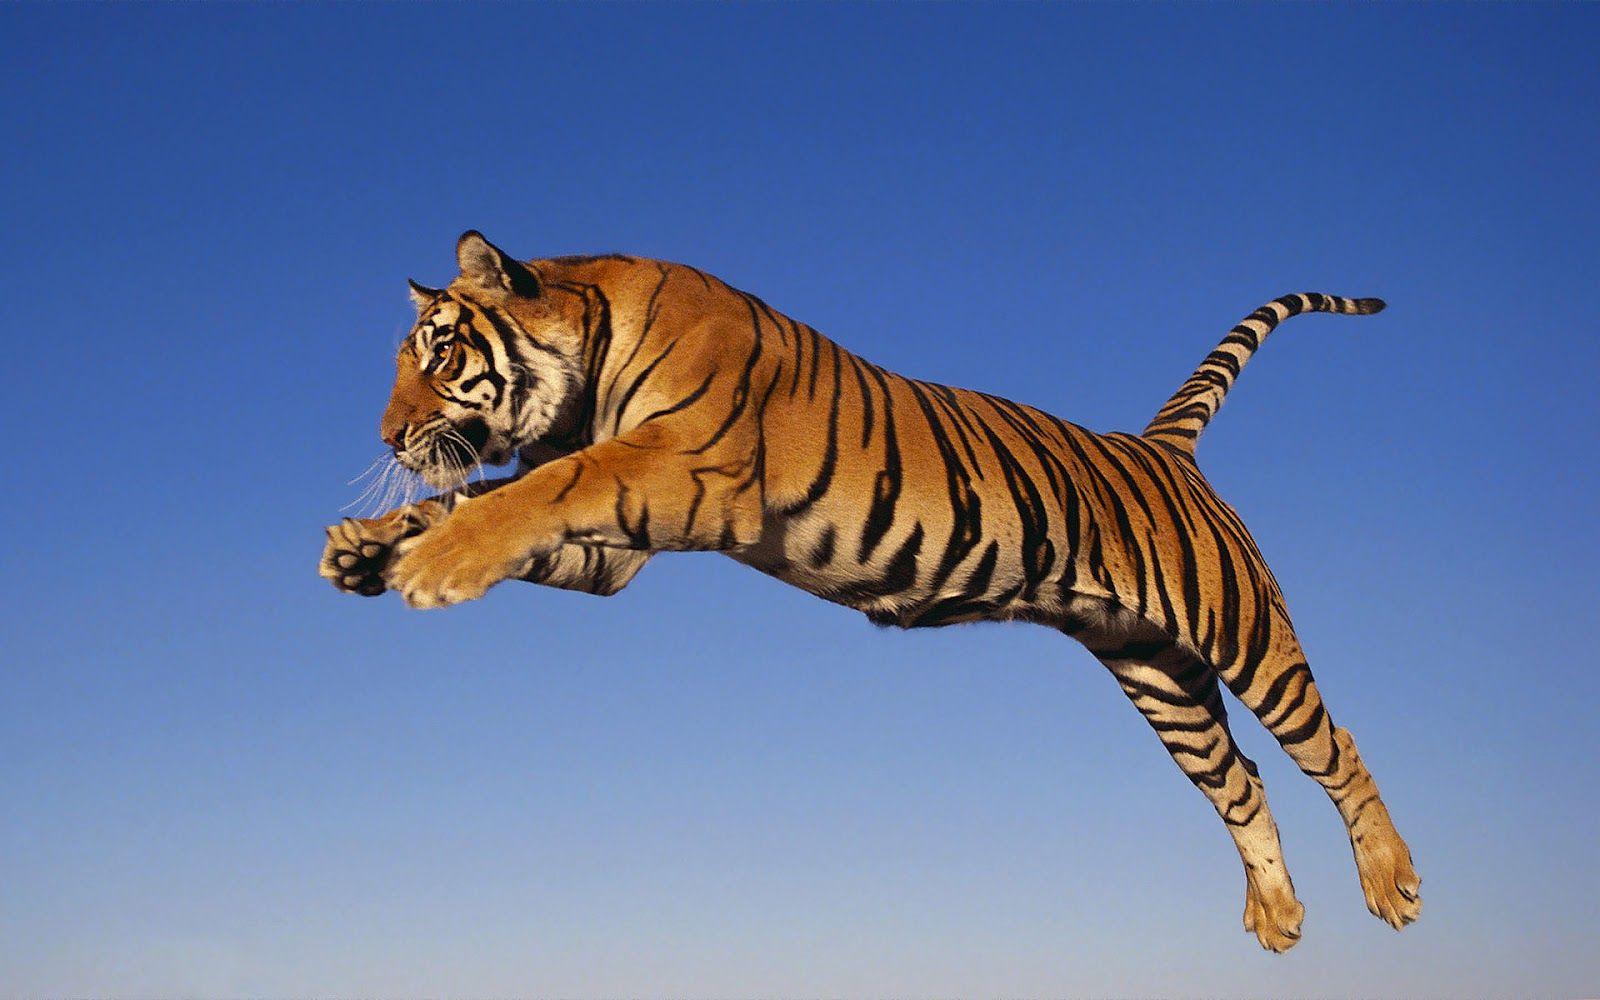 Hd Tiger Image Wallpaper and Picture. Tiger picture, Pet